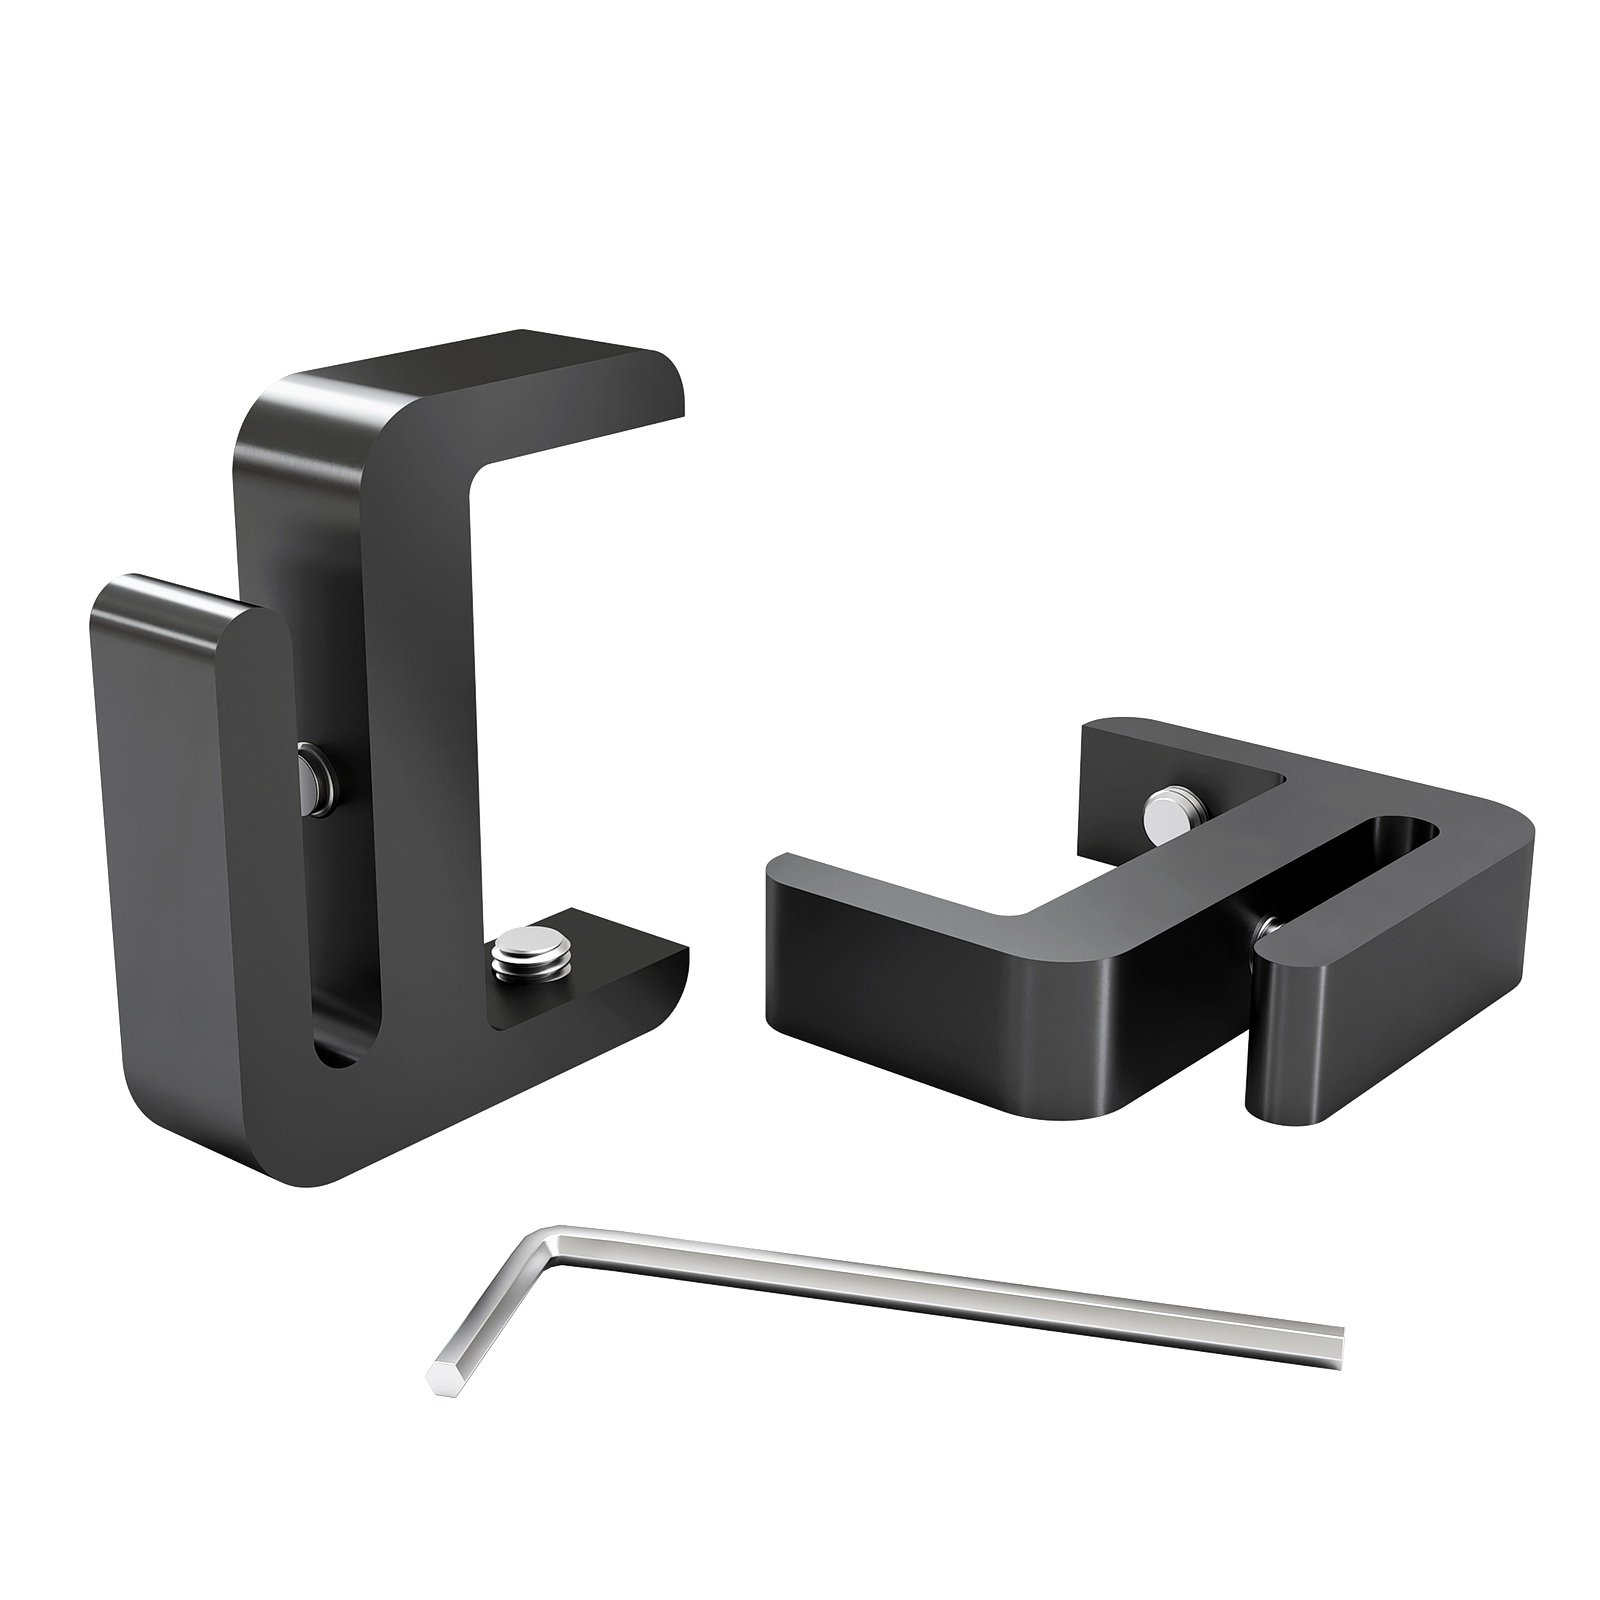 ''Set of 2,  Clamp, Aluminum Matte black Anodized Finish, to Accommodate 1-1/2'' to 1-5/8'' Counters. Hold up to 1/4'' material thickness M6 Set screw need 3mm Allen Wrench''